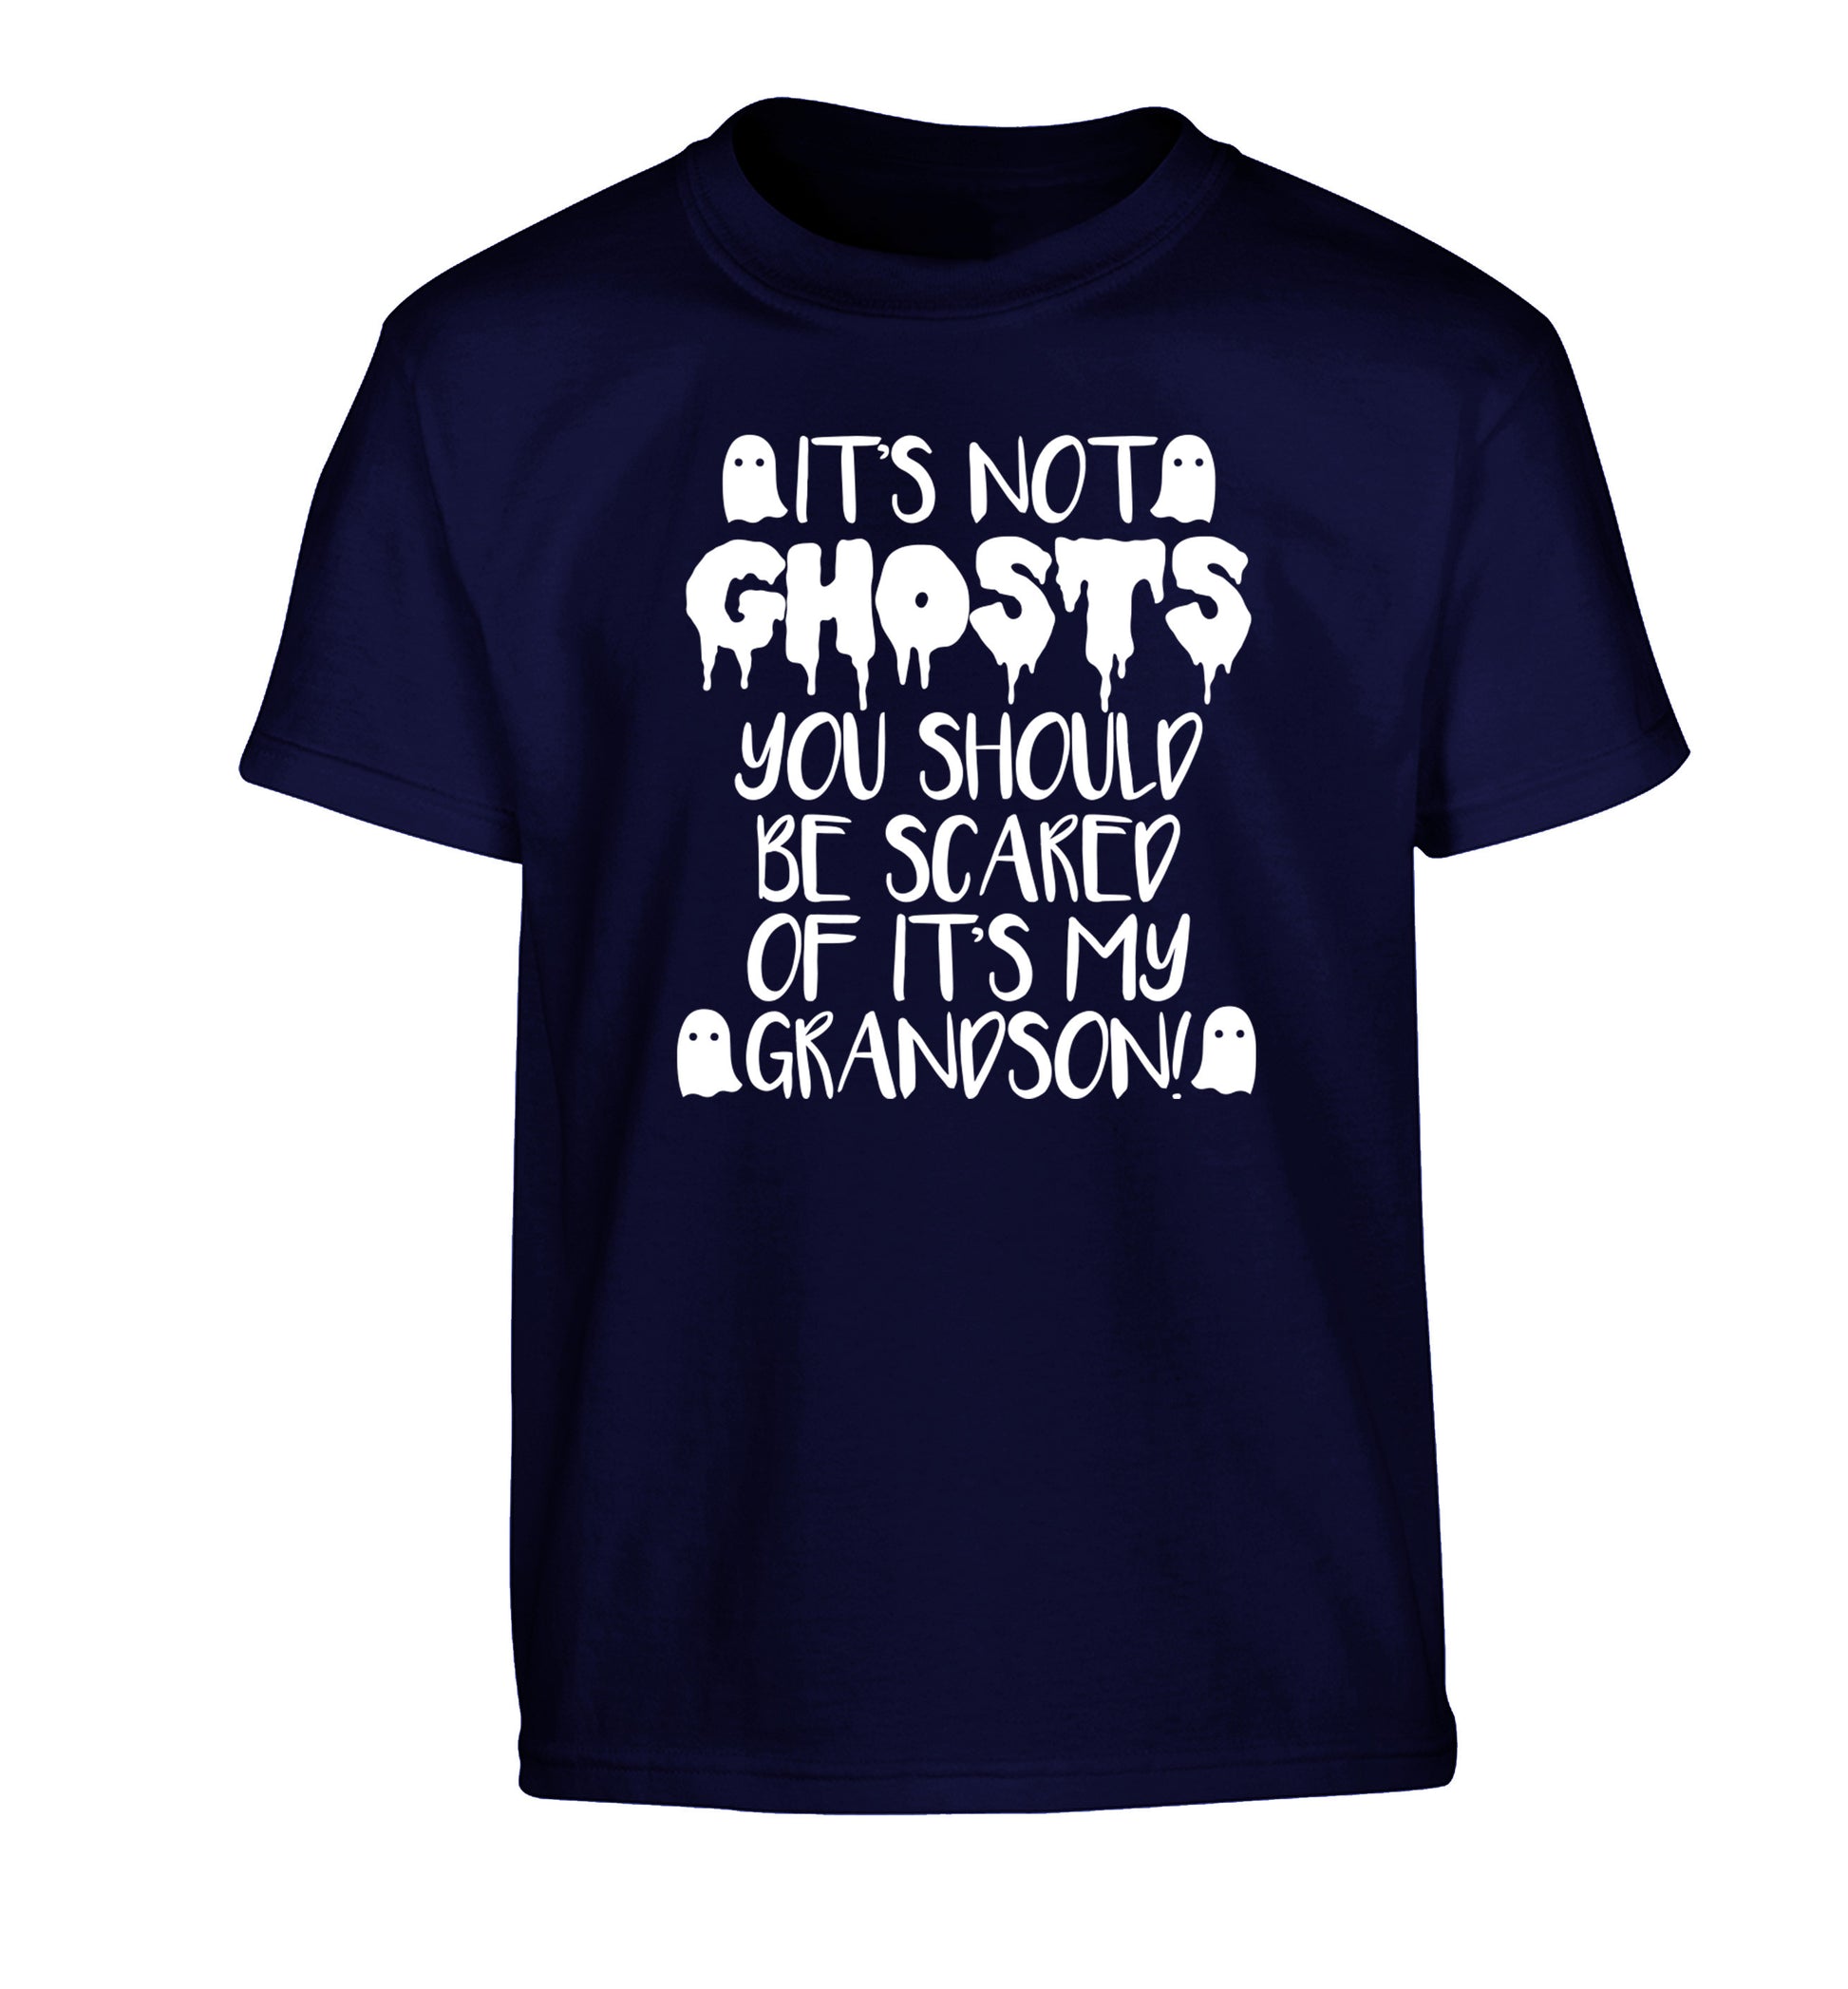 It's not ghosts you should be scared of it's my grandson! Children's navy Tshirt 12-14 Years